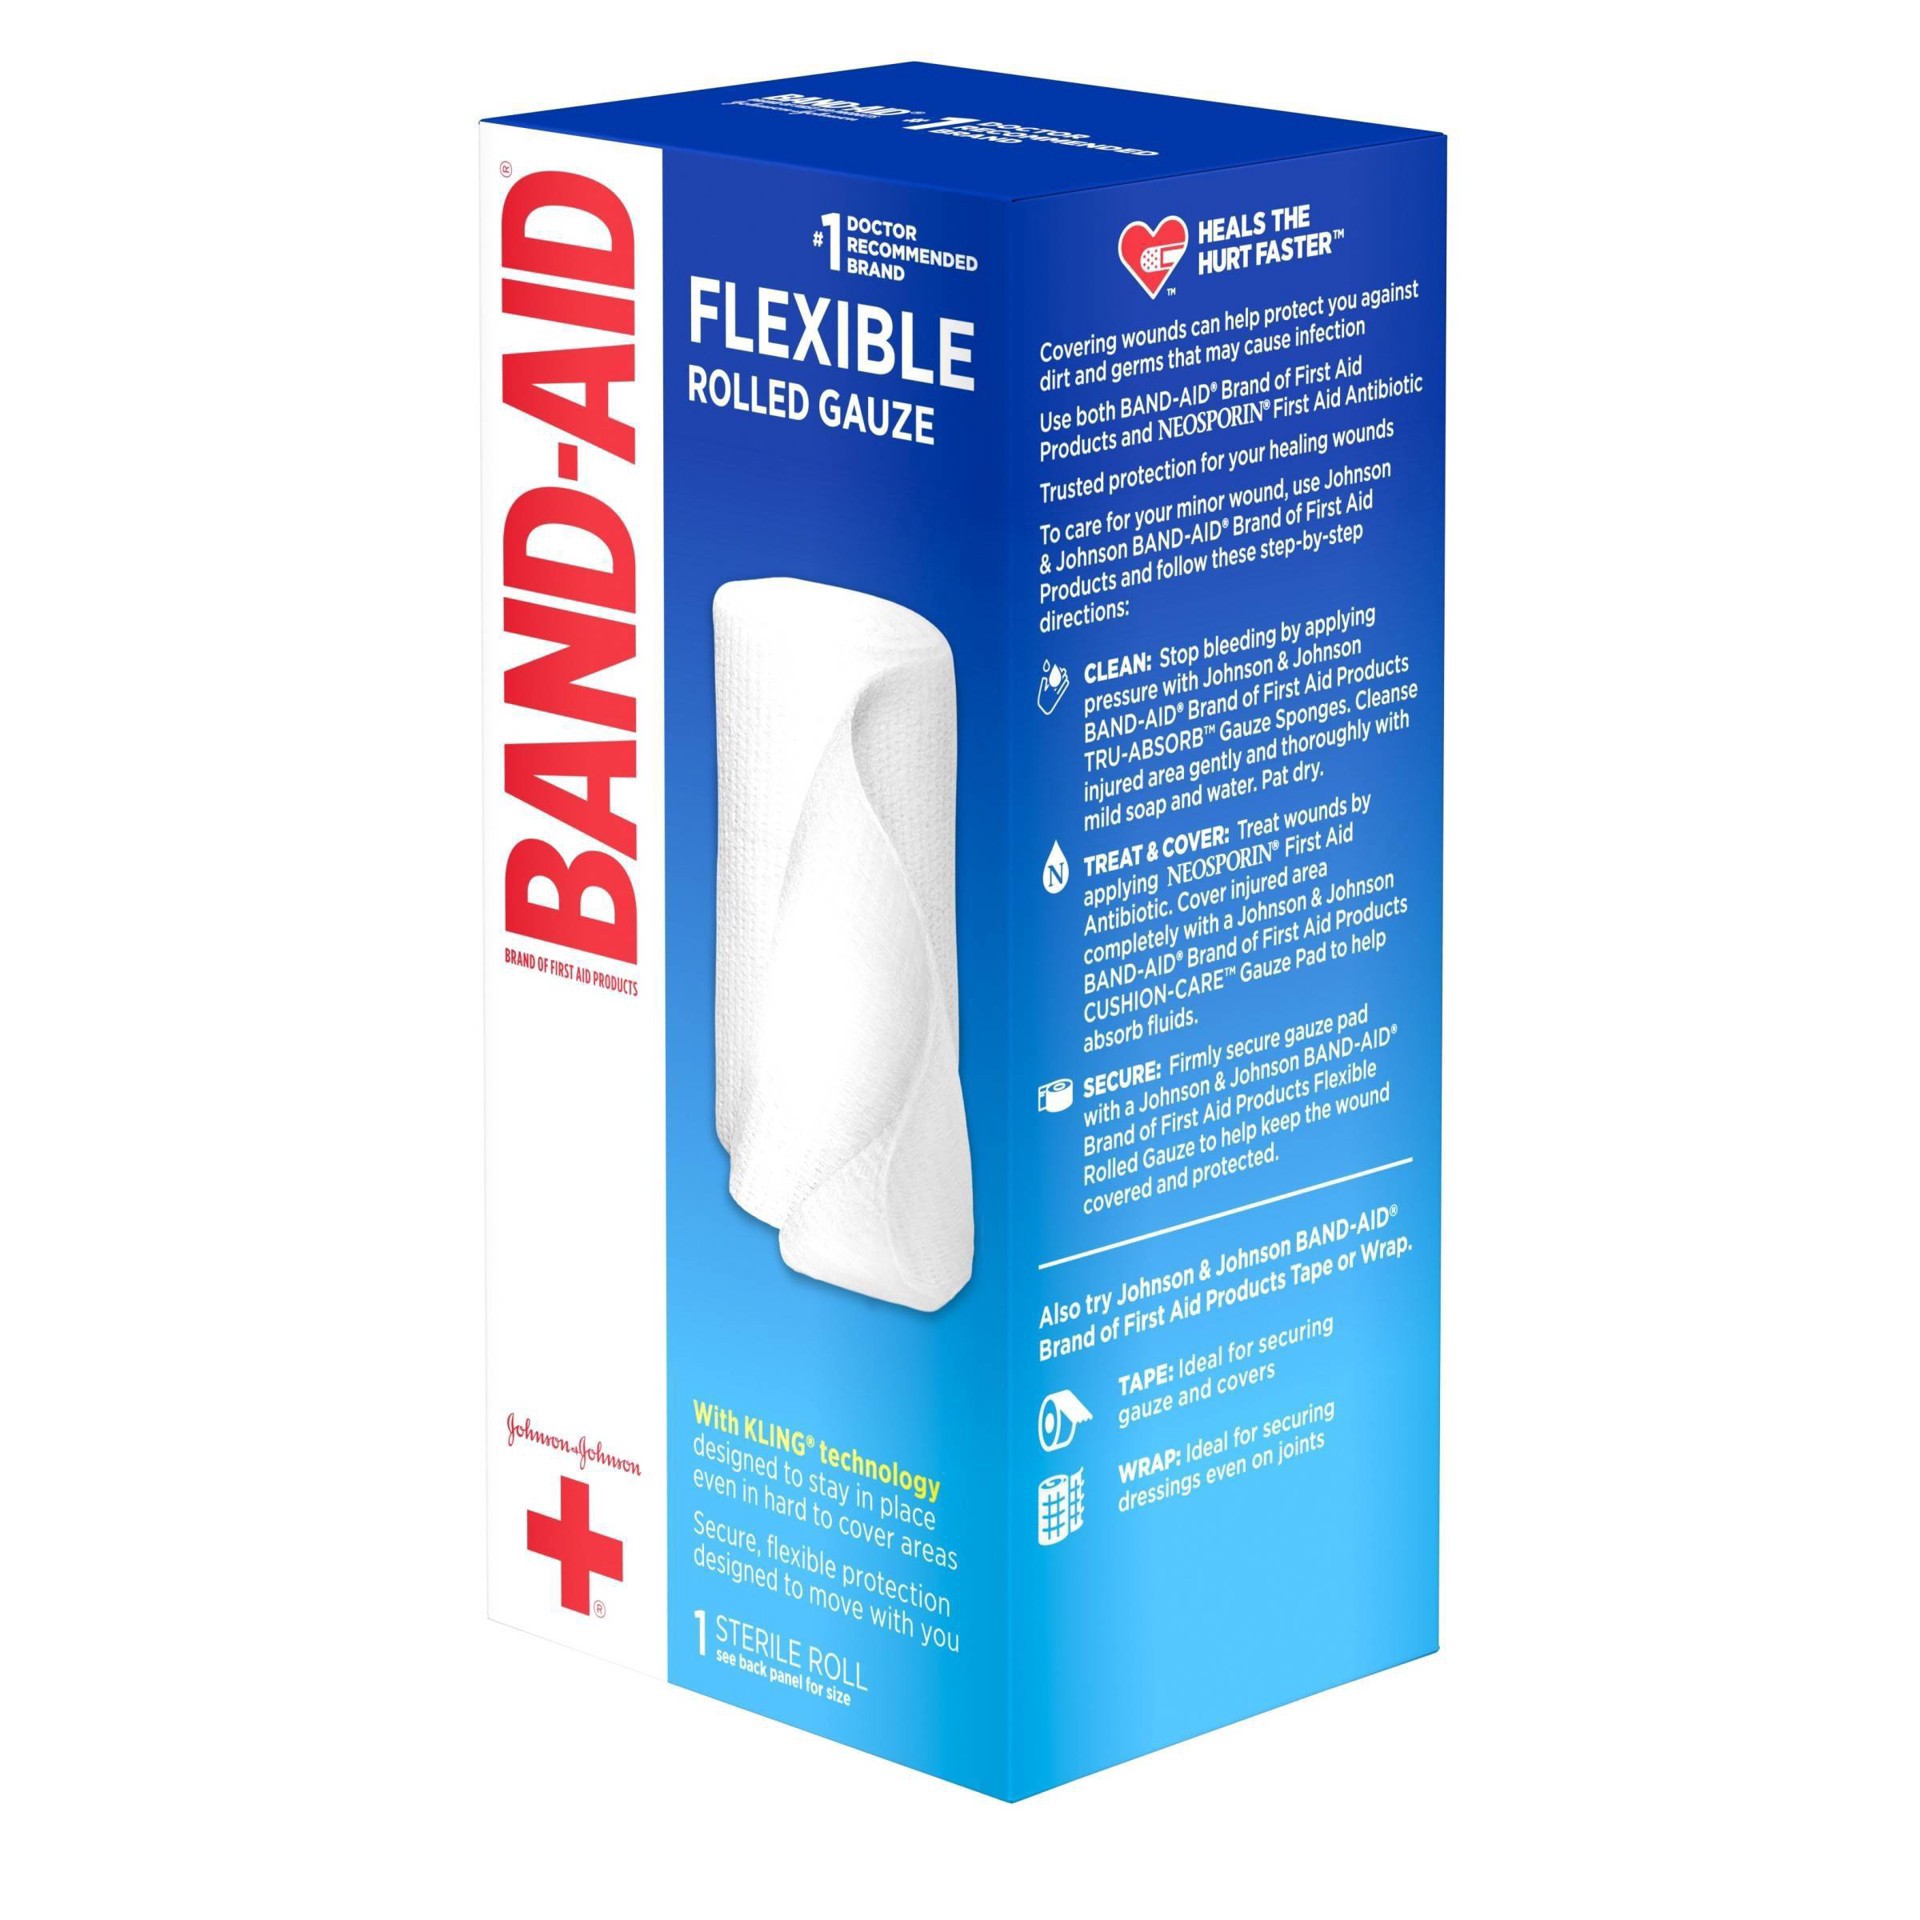 slide 7 of 15, BAND-AID Band Aid Brand of First Aid Products Flexible Rolled Gauze Dressing for Minor Wound Care, soft Padding and Instant Absorption, 4 Inches by 2.5 Yards, 1 ct